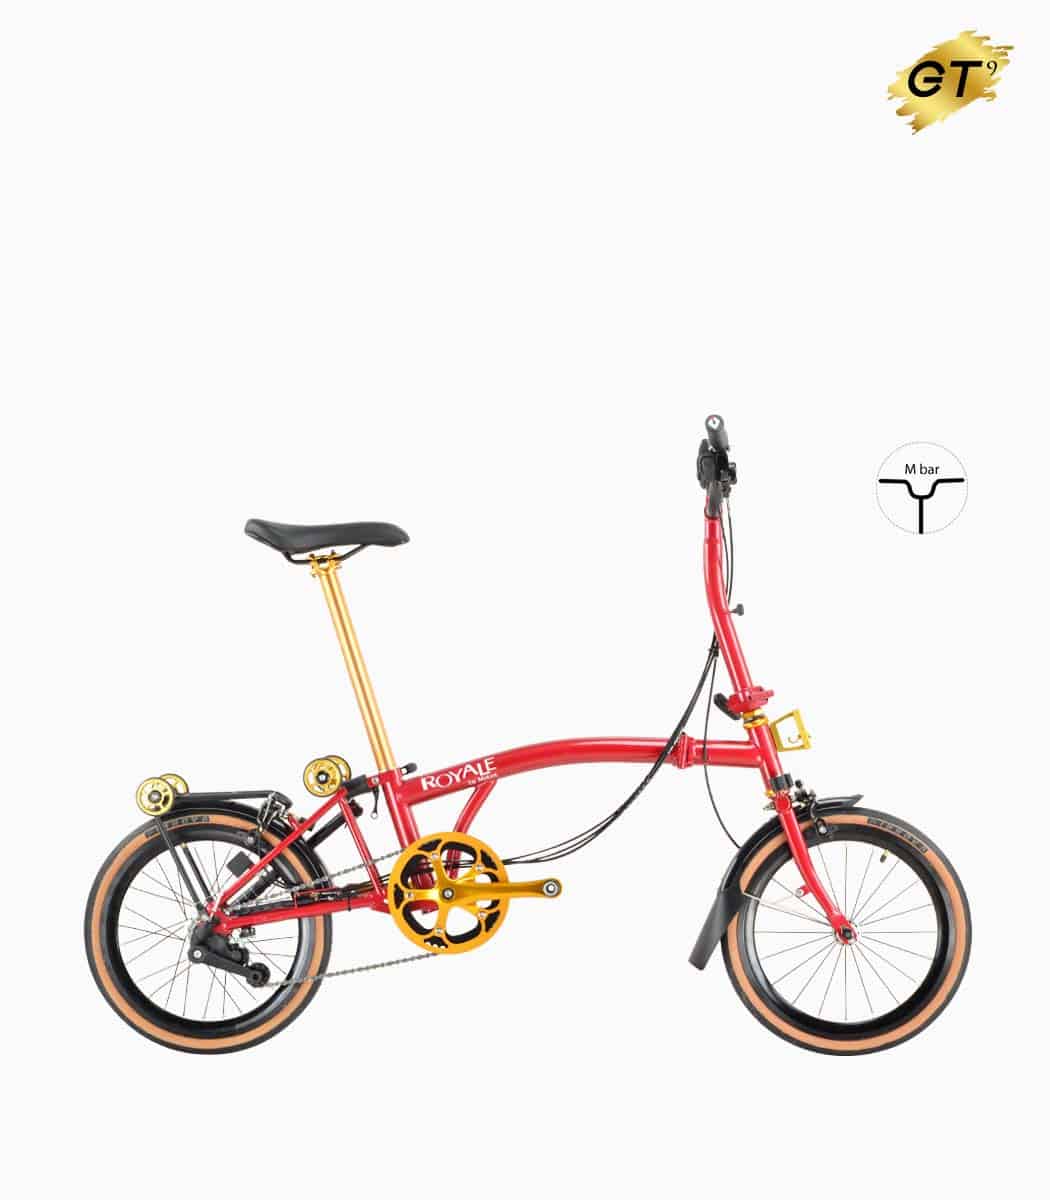 MOBOT ROYALE GT M9 (ROSE RED) foldable bicycle gold edition M-bar with tanwall tyres high profile rim right